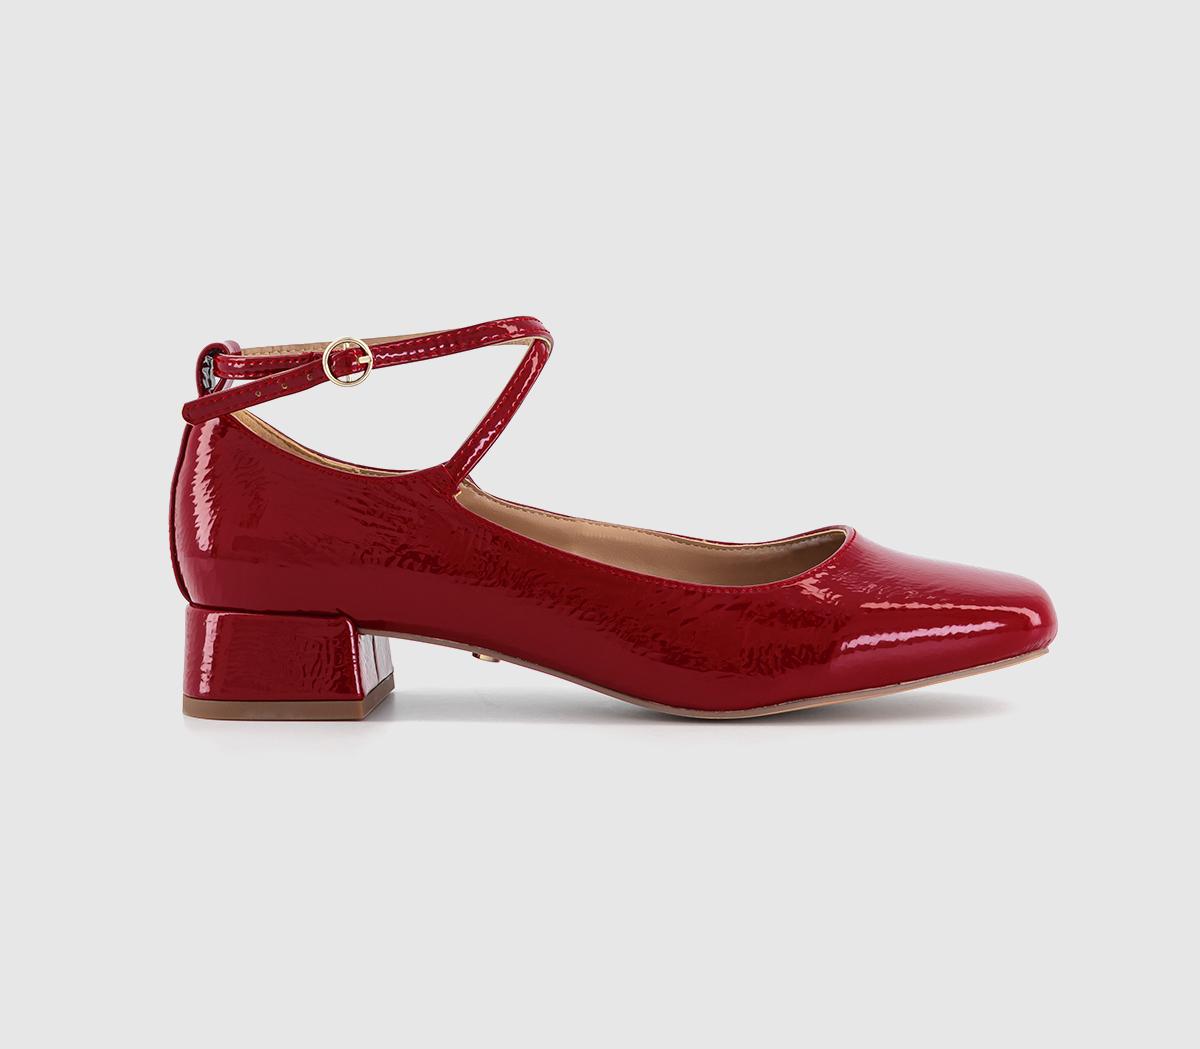 Francesca Cross Over Ankle Strap Mary Jane Shoes Red Patent